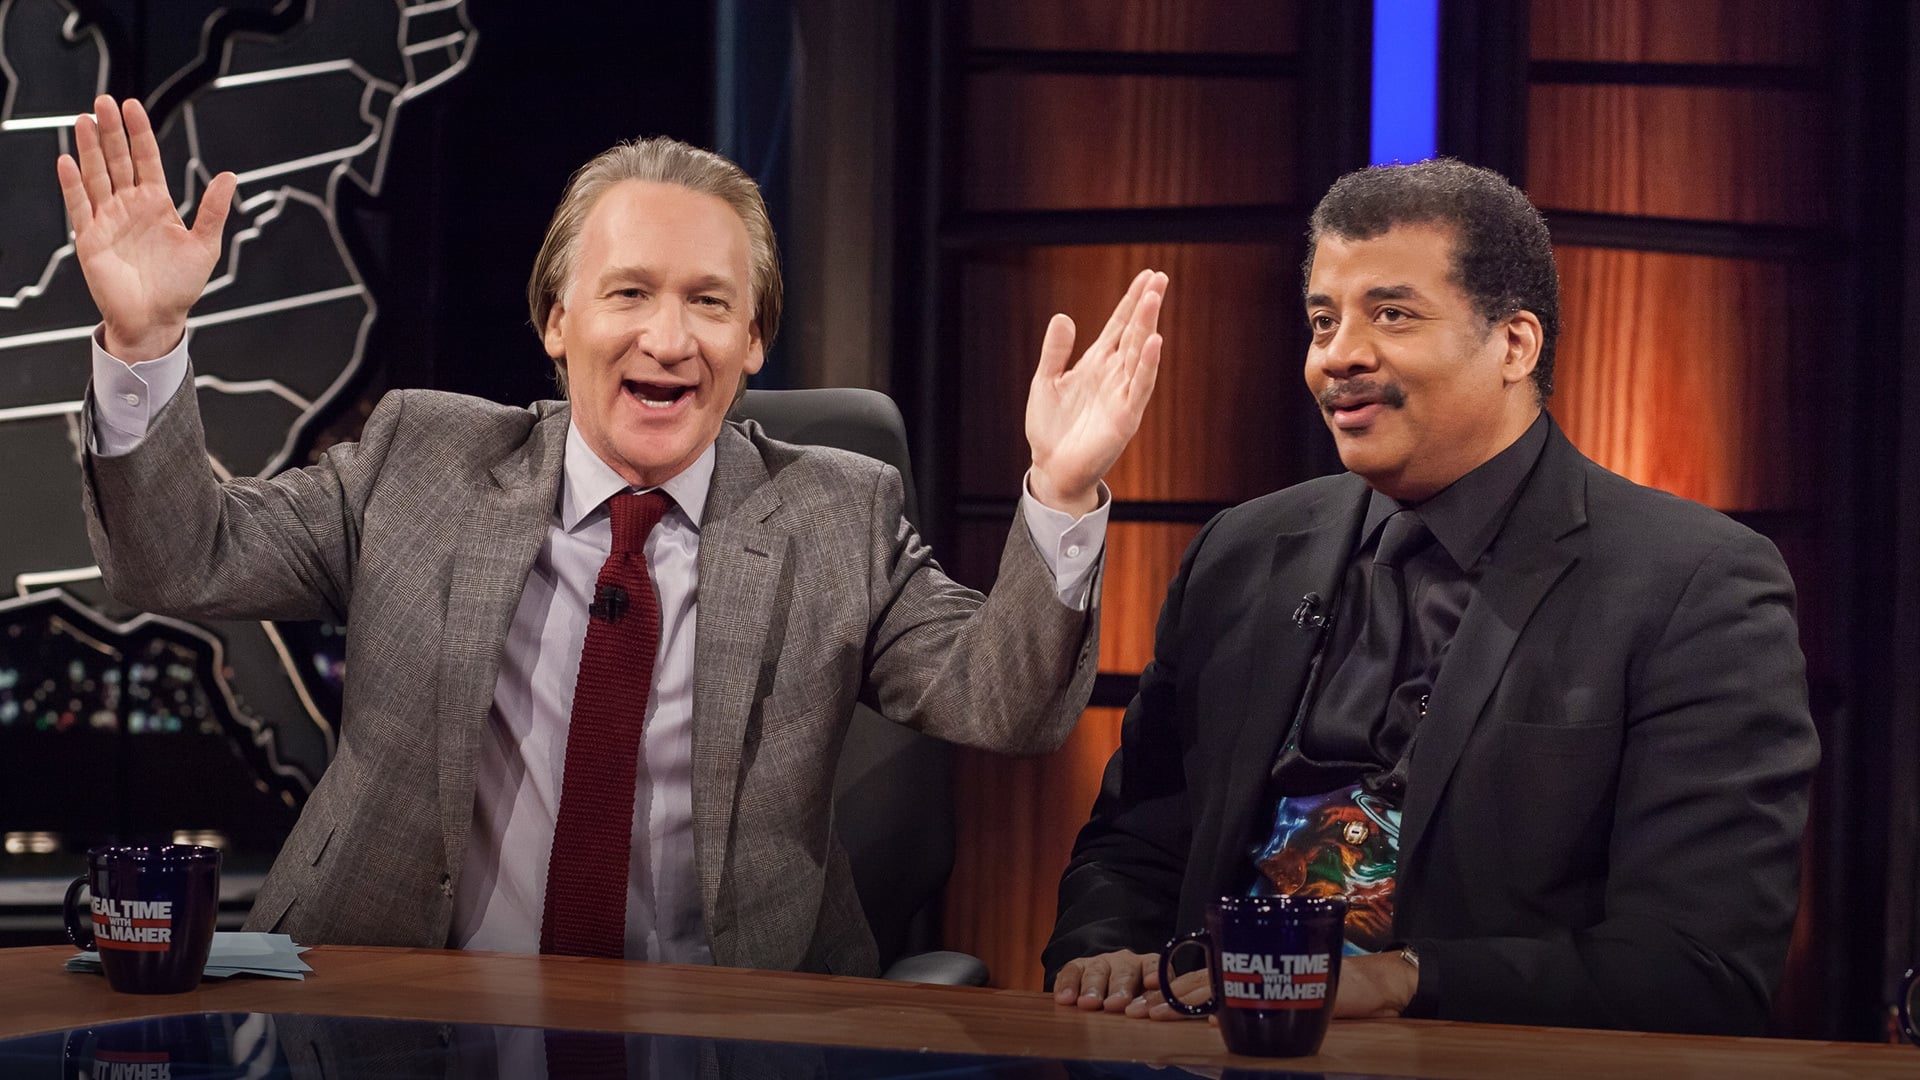 Real Time with Bill Maher 13x29